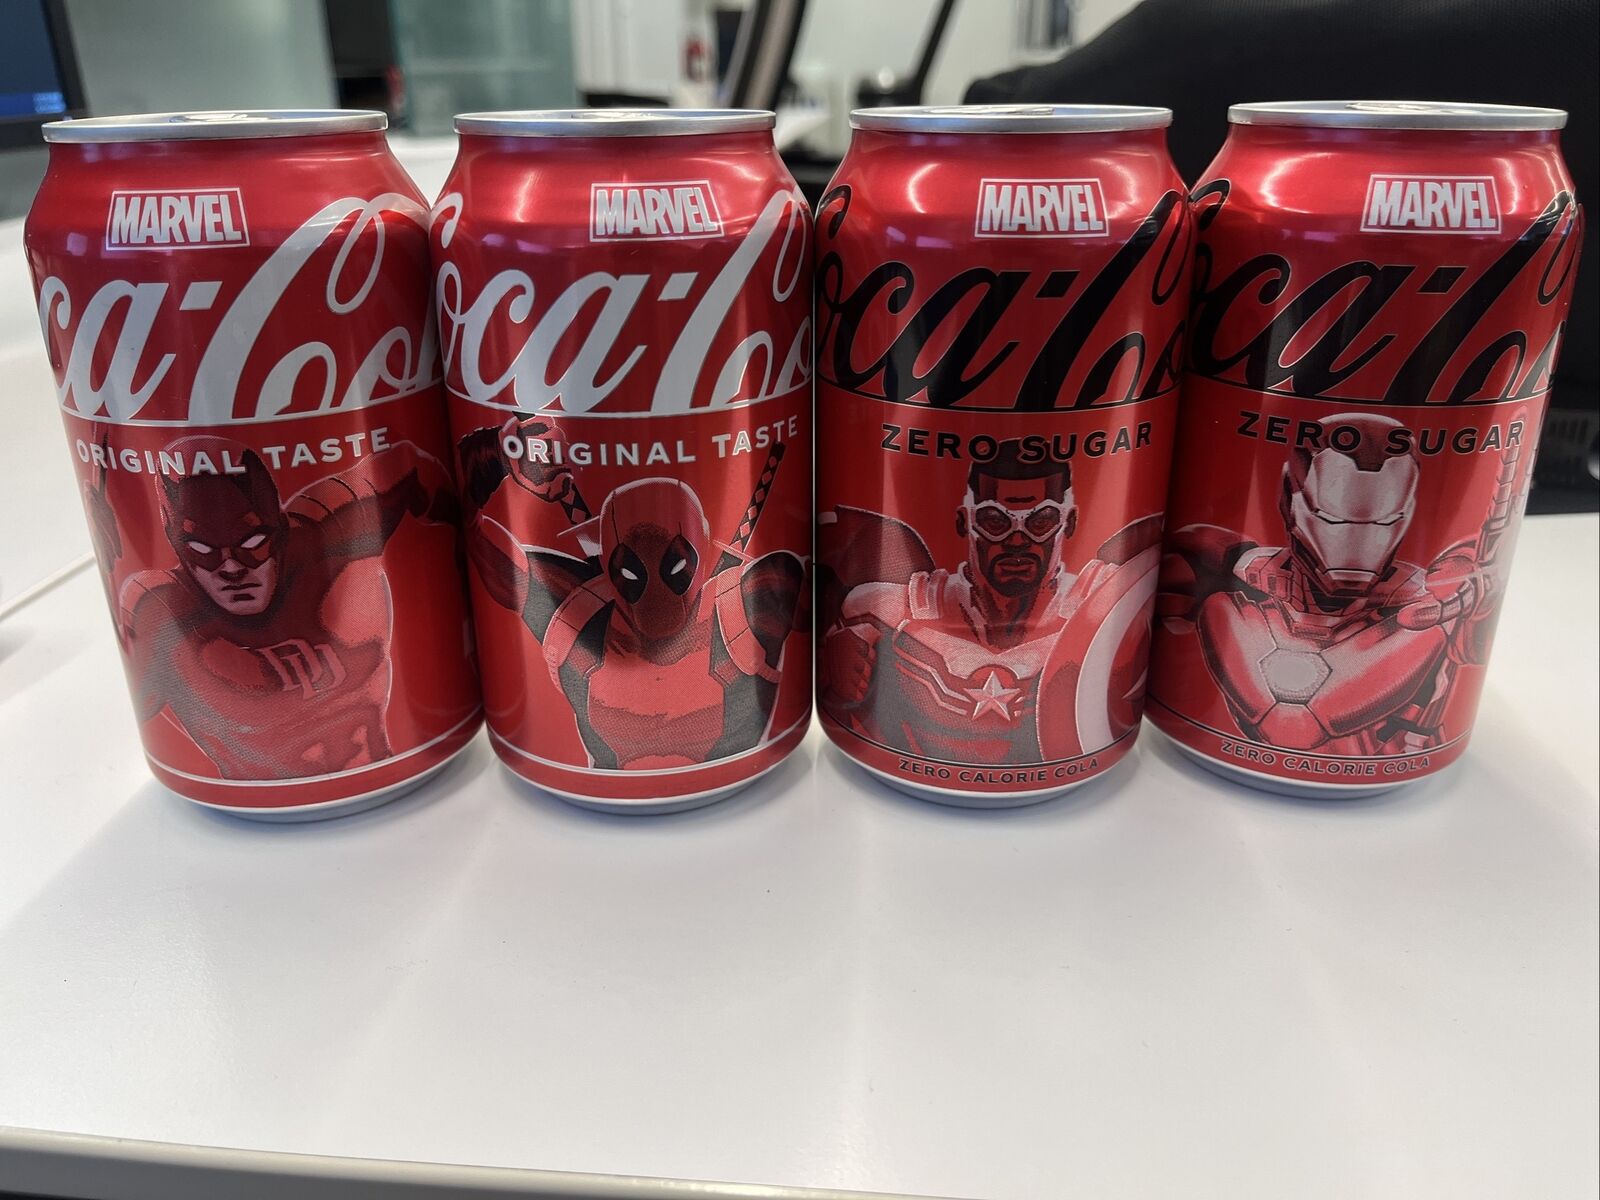 Lot of 4 Marvel Coca Cola Cans - Brand New & Unopened